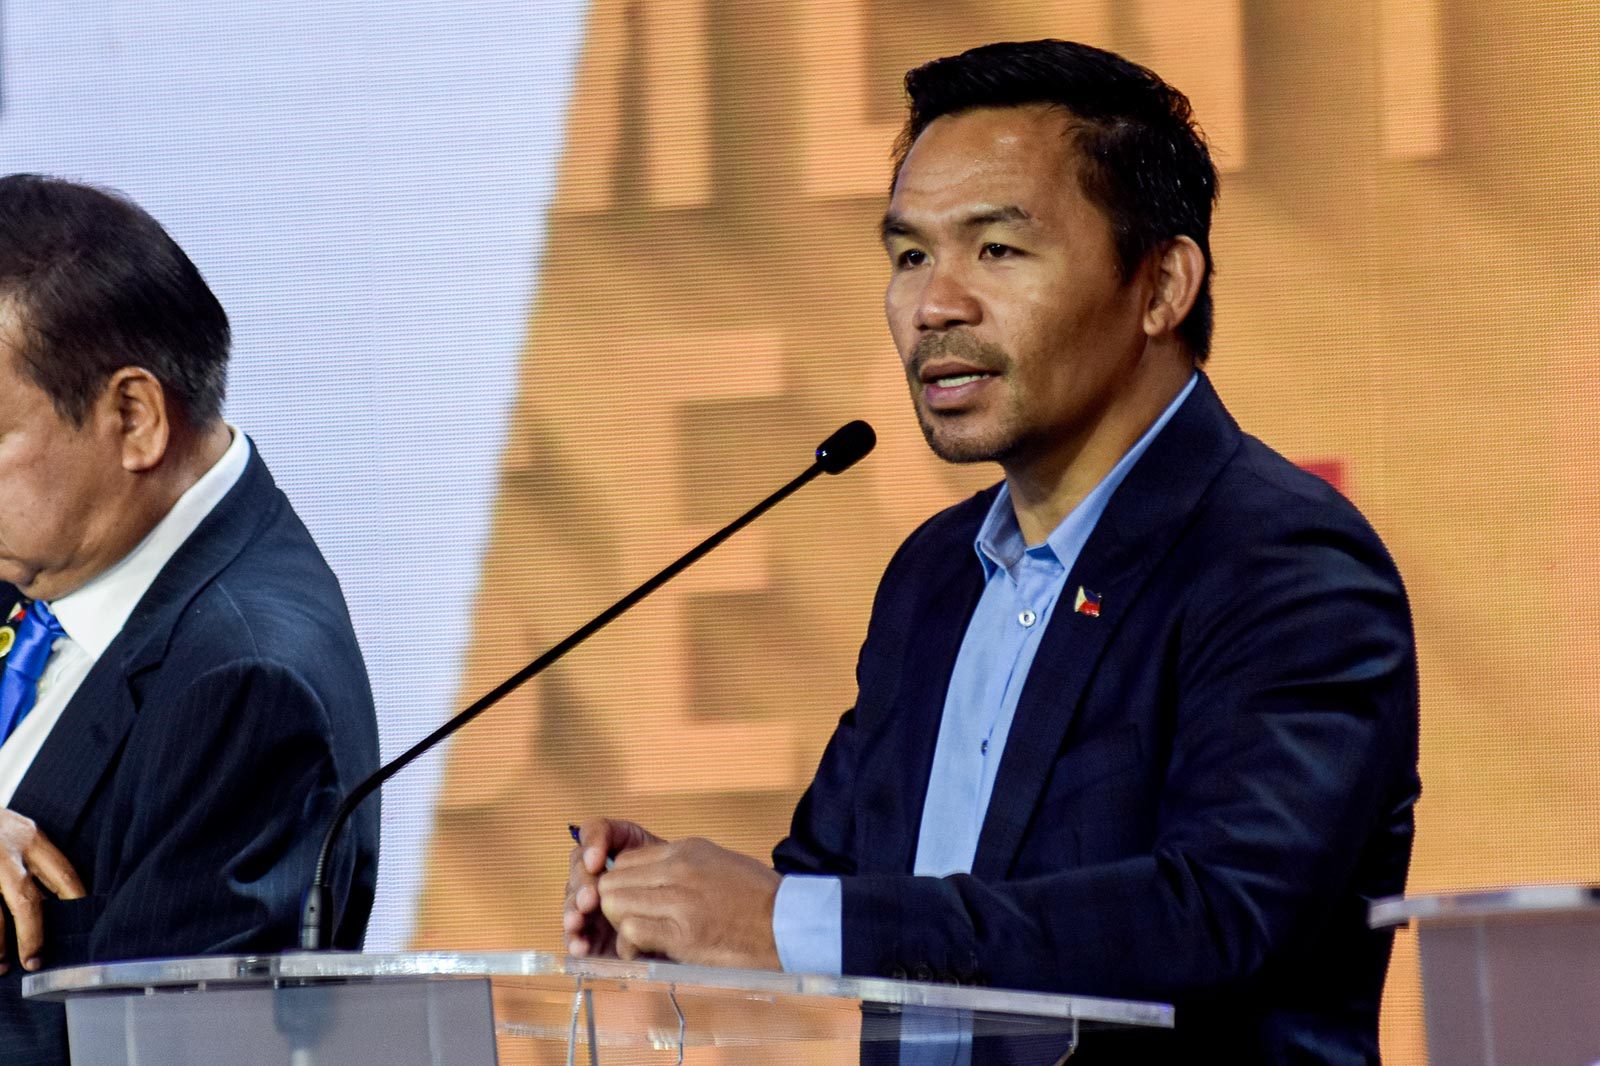 At Comelec debate, Pacquiao shows why he should be the choice of the poor